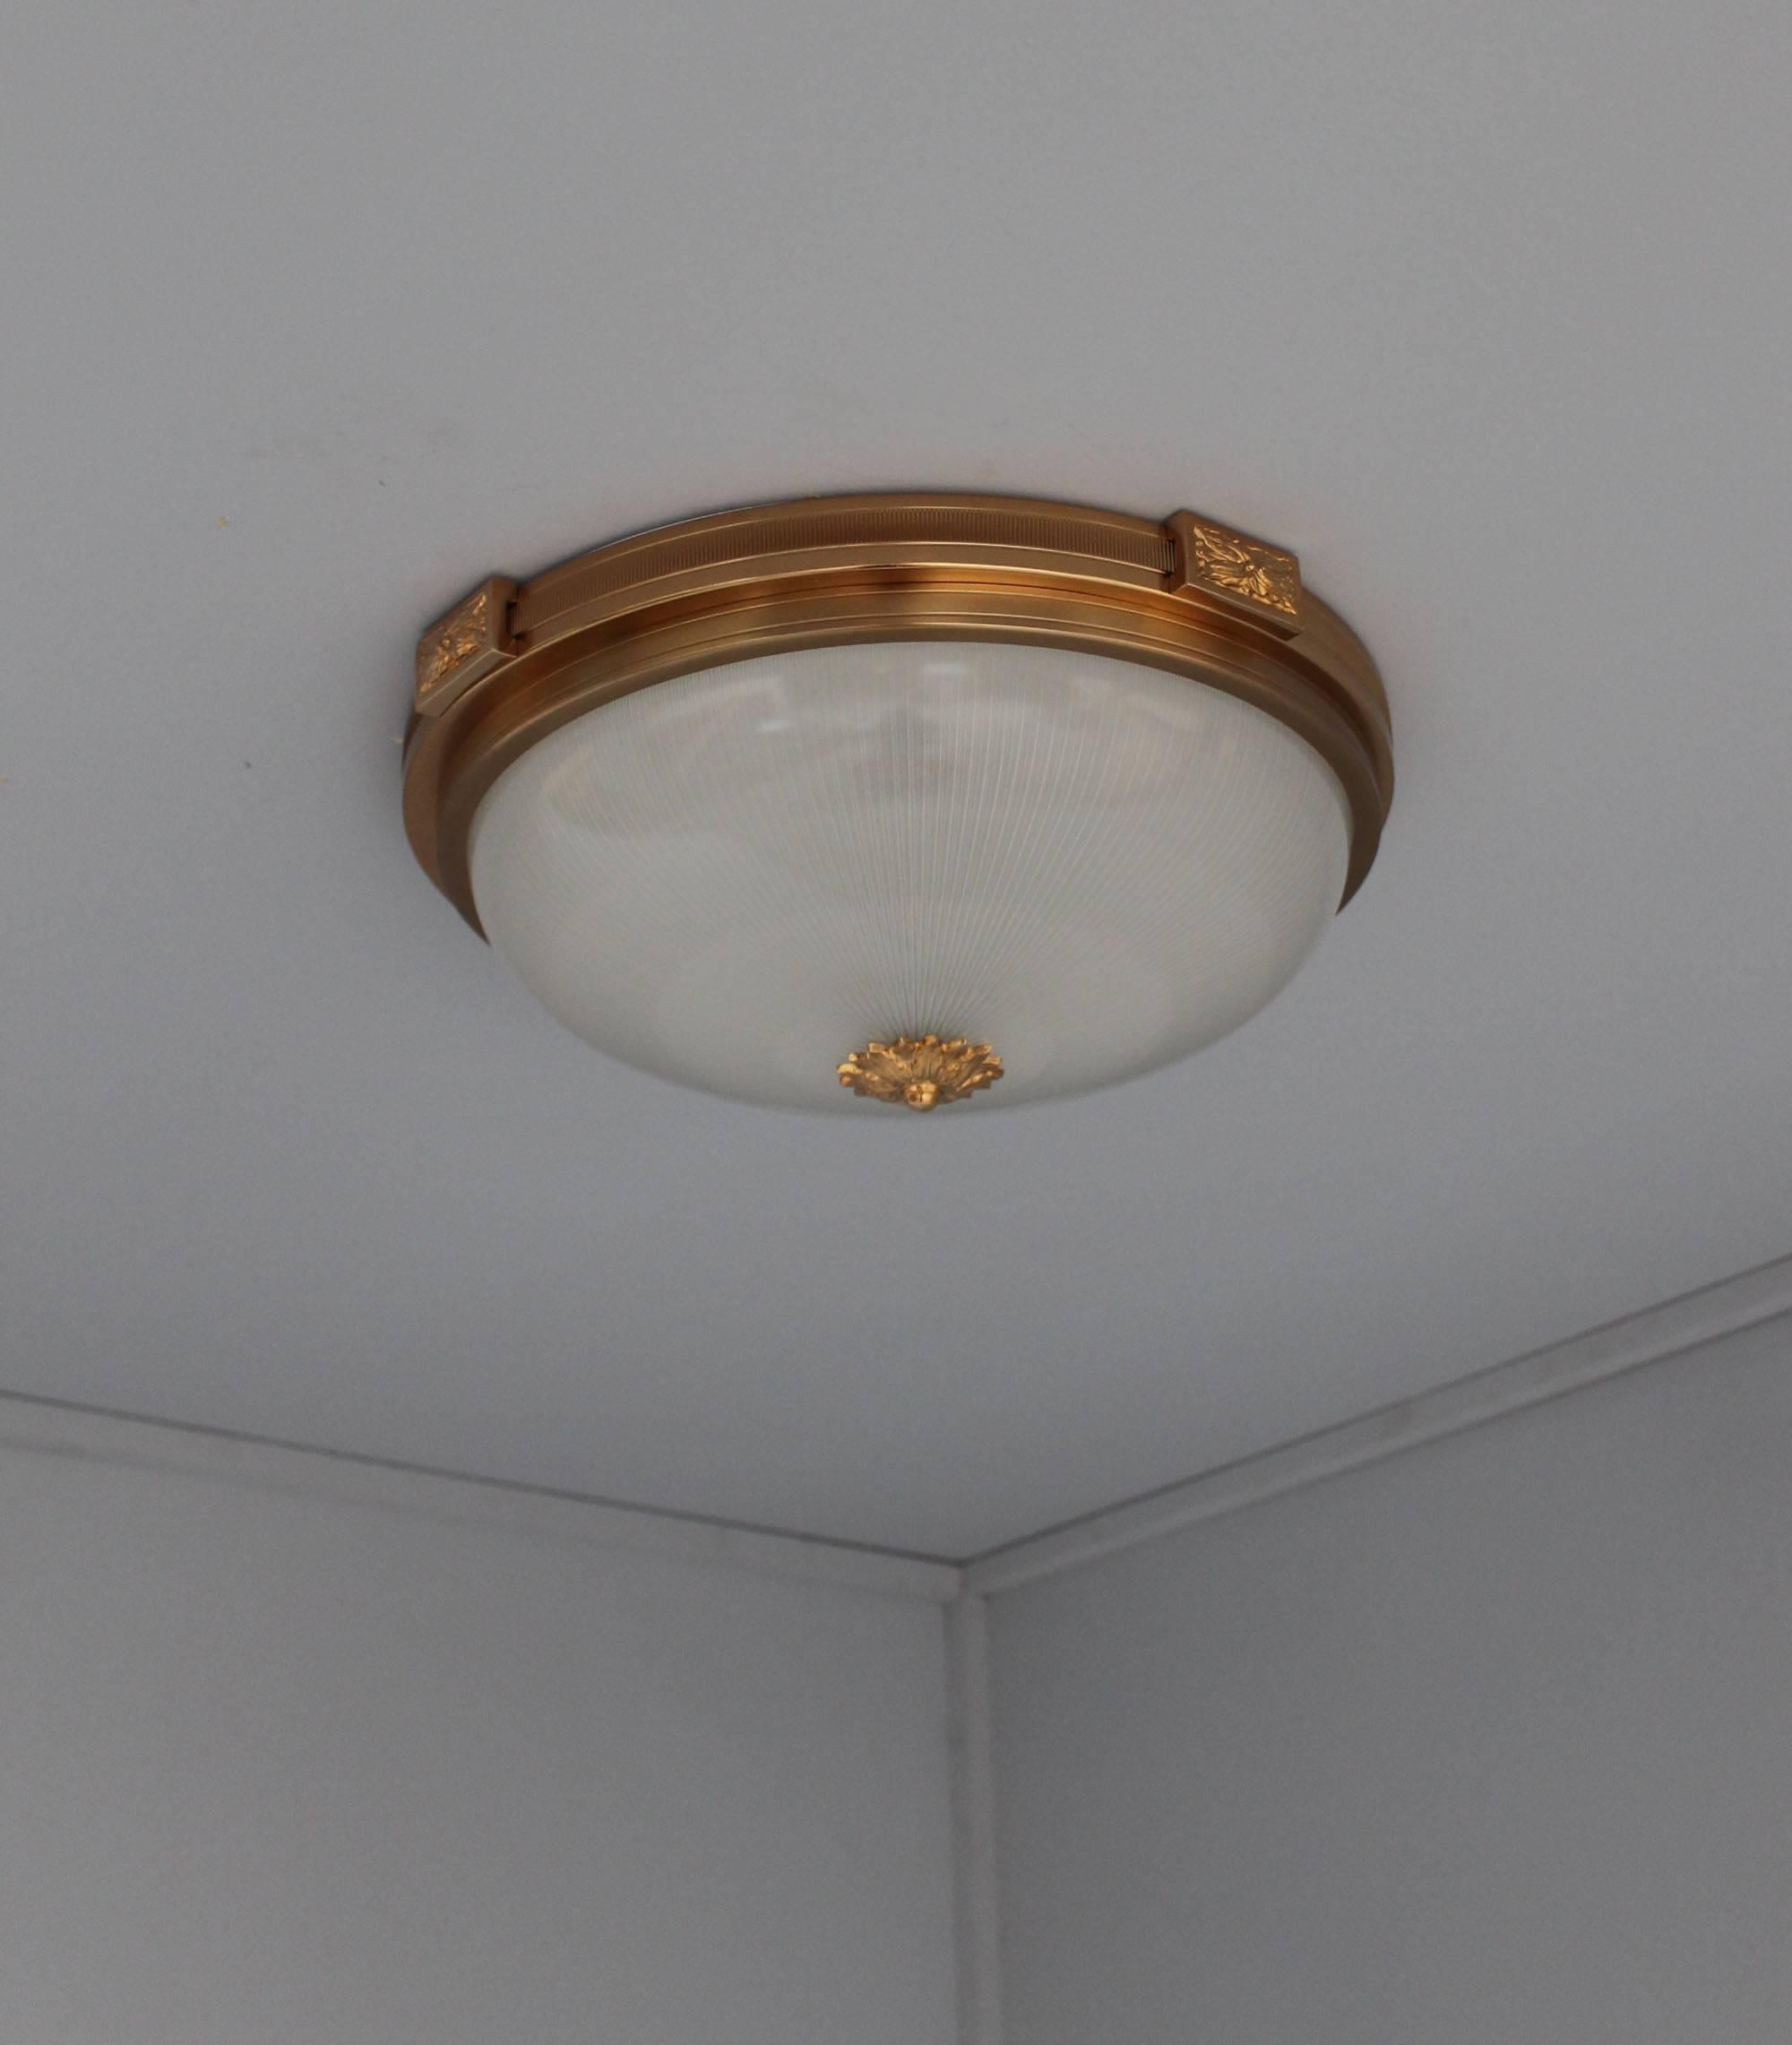 Three French neoclassical gilded lacquered brass flush mounts with a fluted glass diffuser.

Price is per piece and includes US re-wiring.